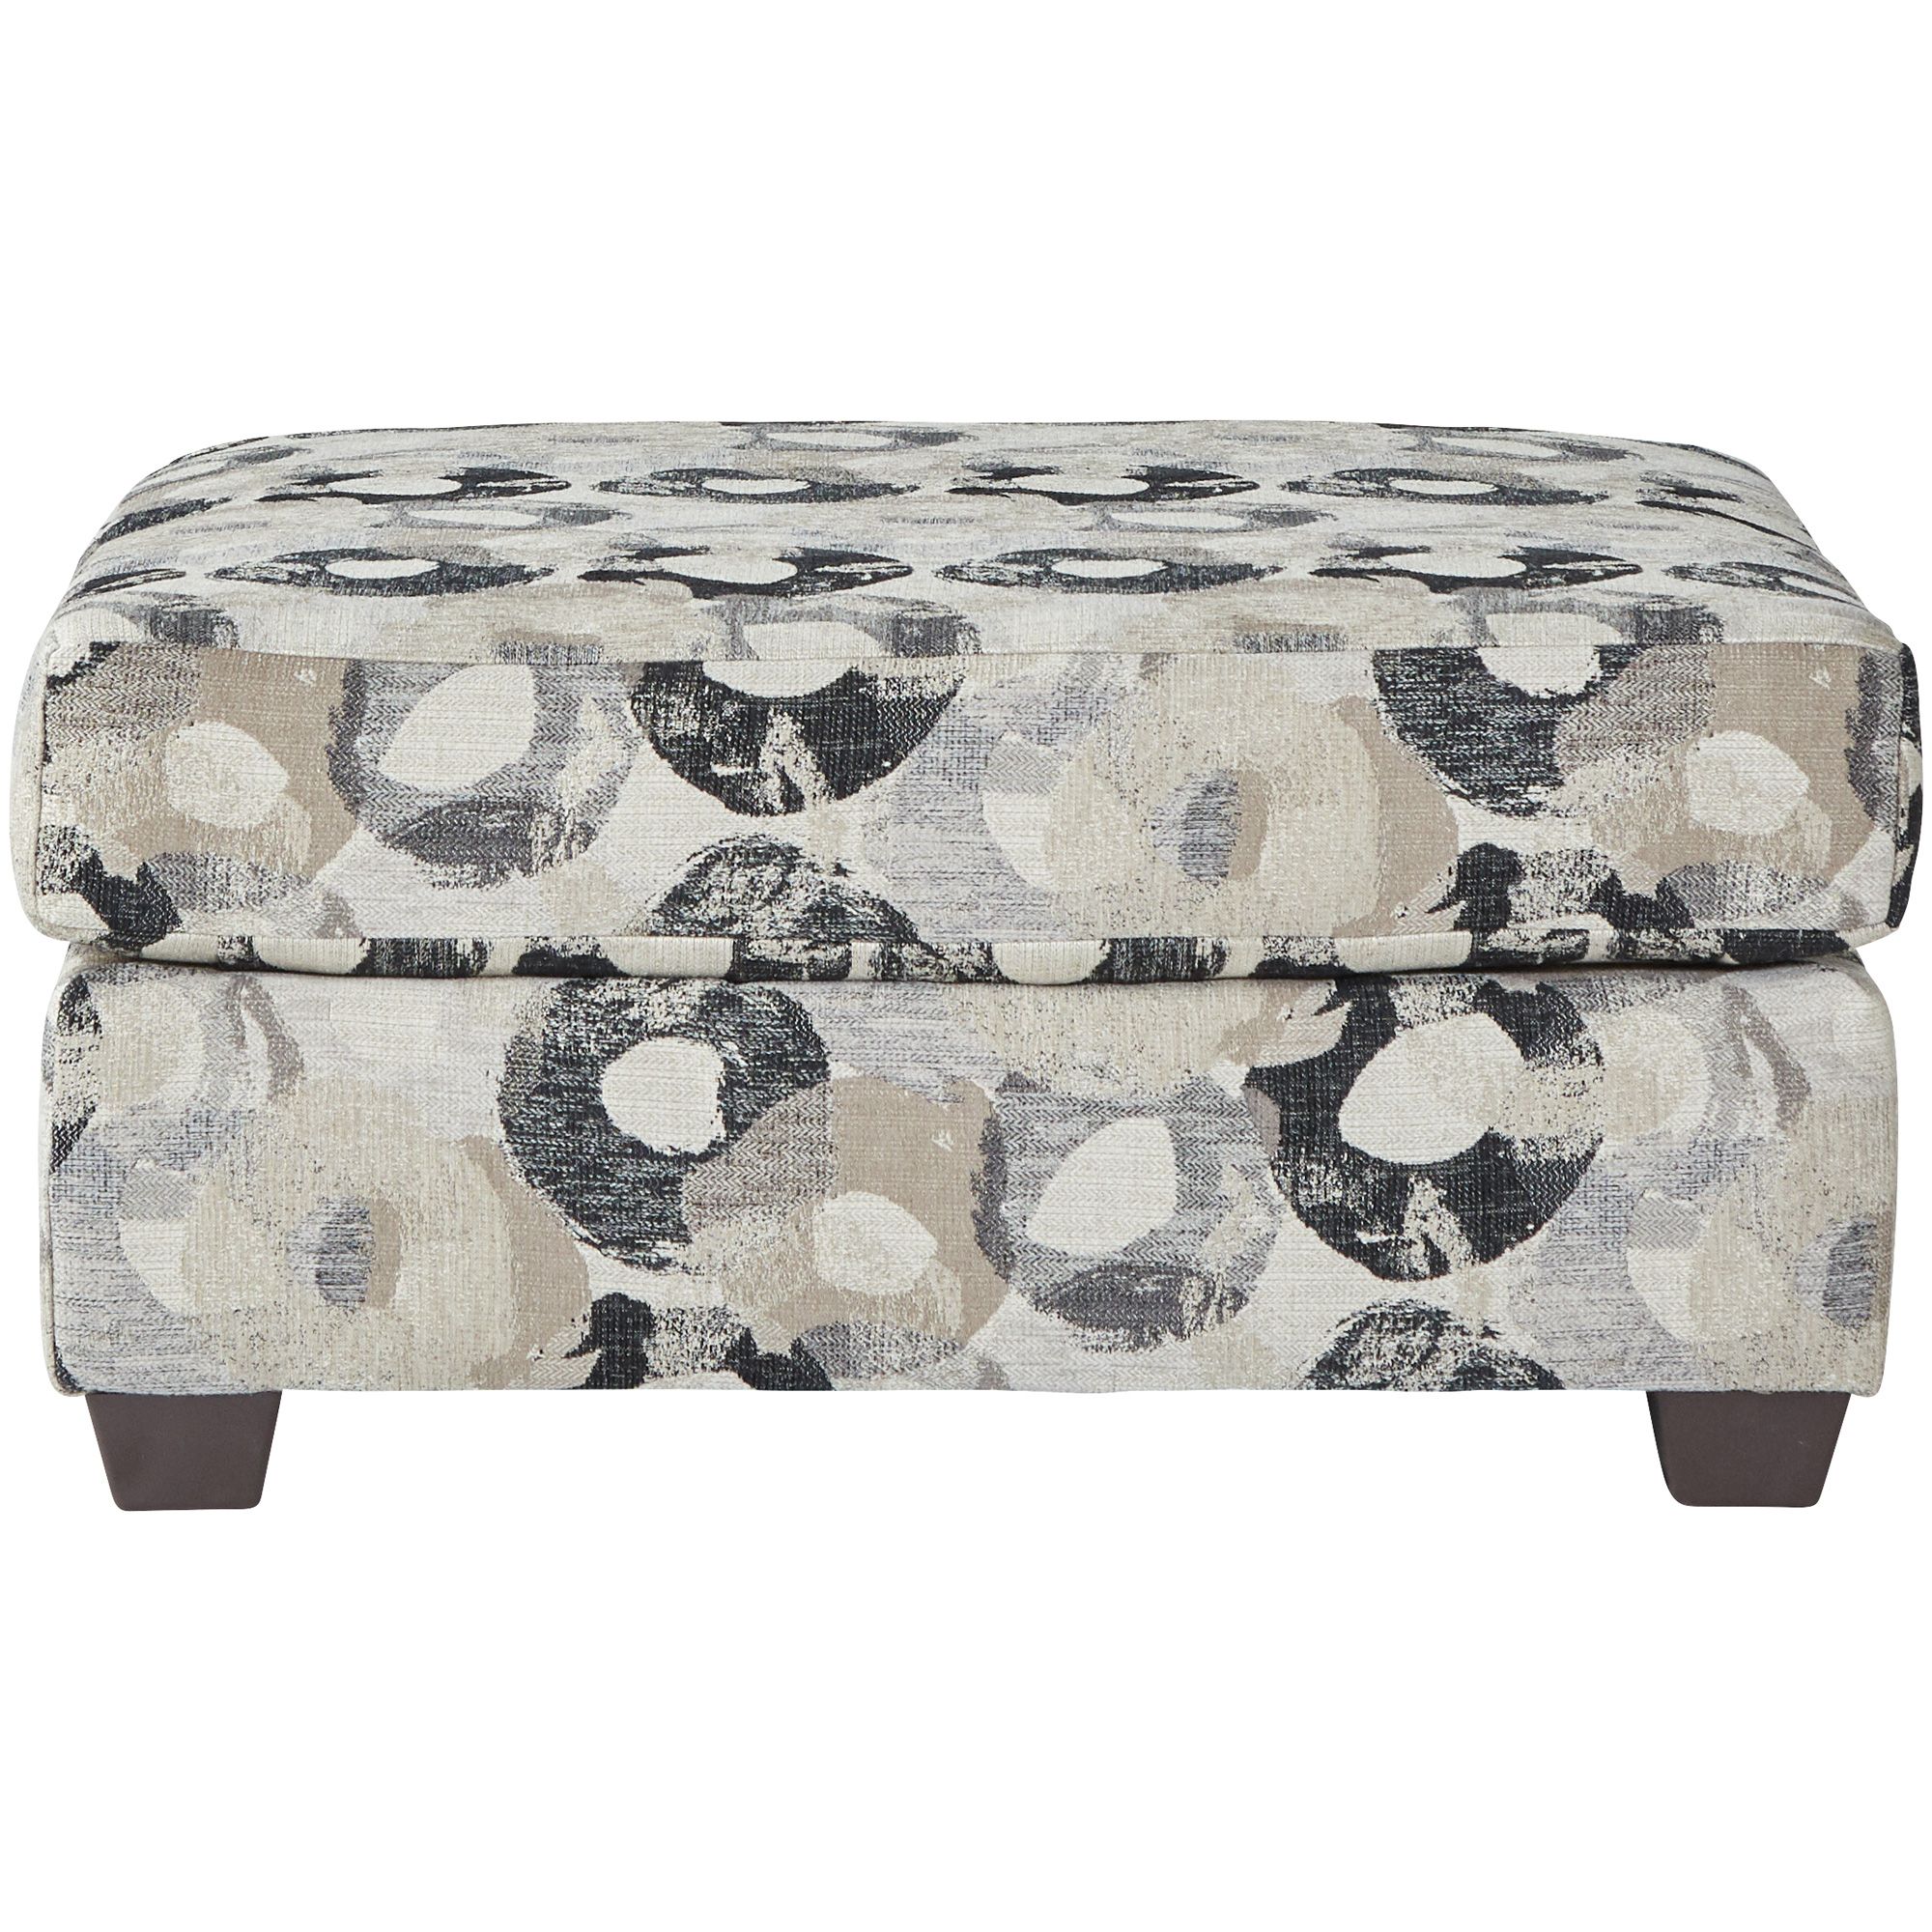 Hughes Furniture | Joey Graystone Ottoman | Blue On Slumberland Furniture |  Accuweather Shop For Ivory And Blue Ottomans (View 11 of 15)